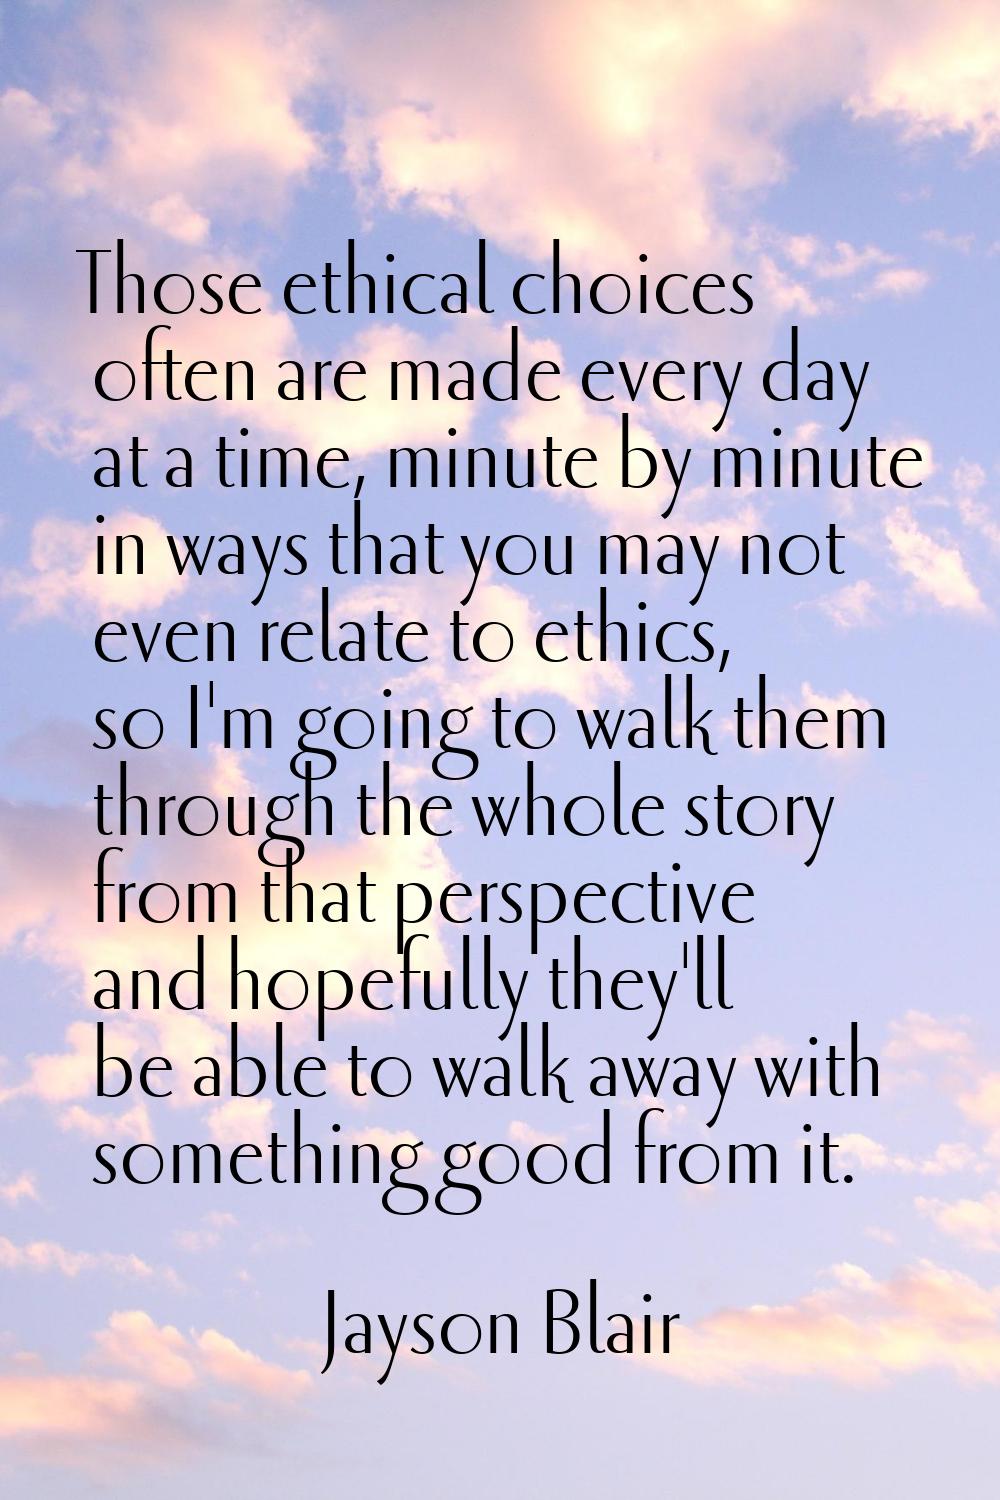 Those ethical choices often are made every day at a time, minute by minute in ways that you may not